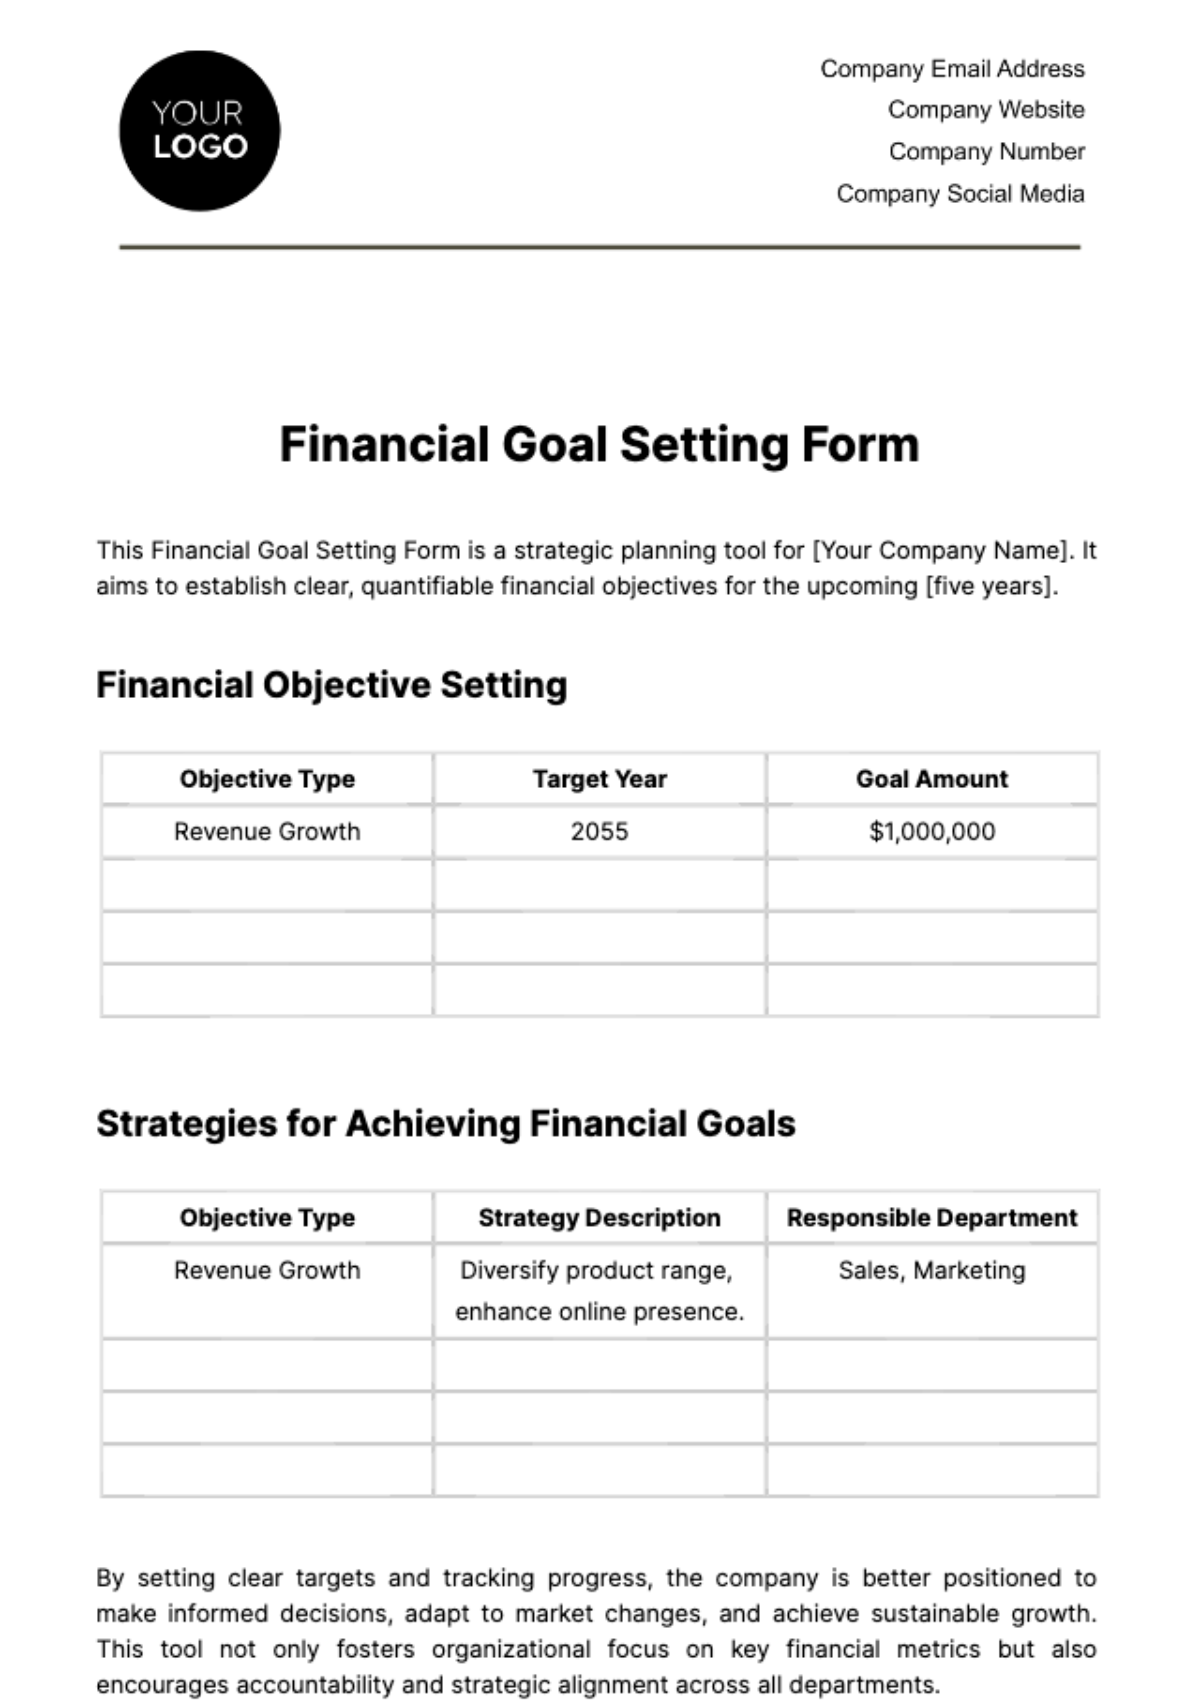 Financial Goal Setting Form Template